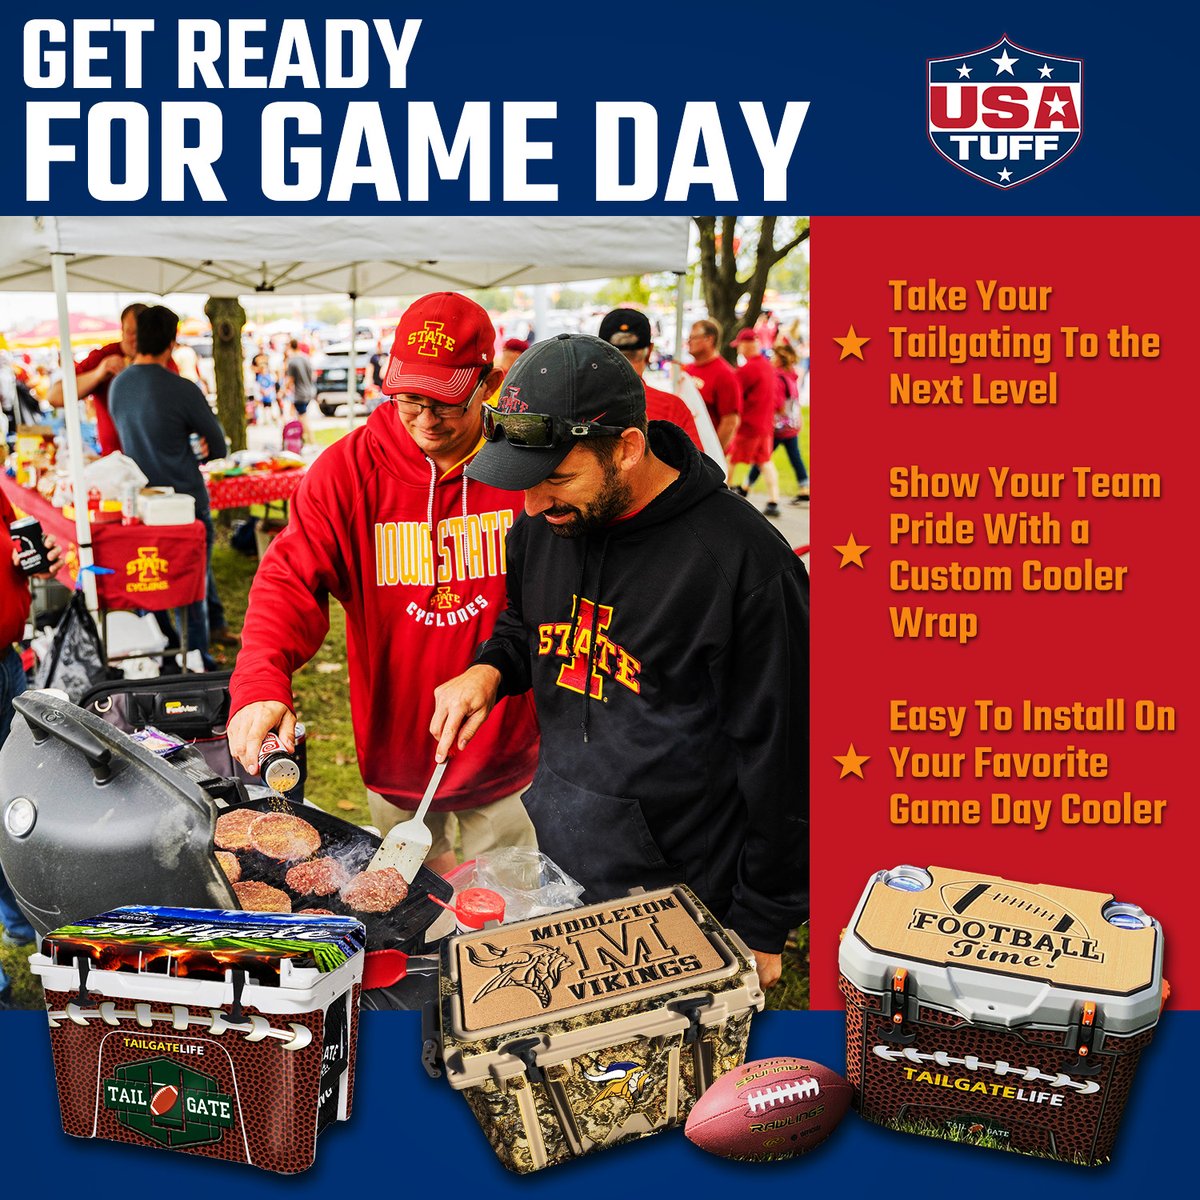 Cooler pads and wrap kits to celebrate your favorite sport and team!  Perfect for Tailgating parties everywhere! bit.ly/TailgateCooler…

#usatuff #shopsmall #shopsmallbusiness #customcoolers #customyeti #customRtic